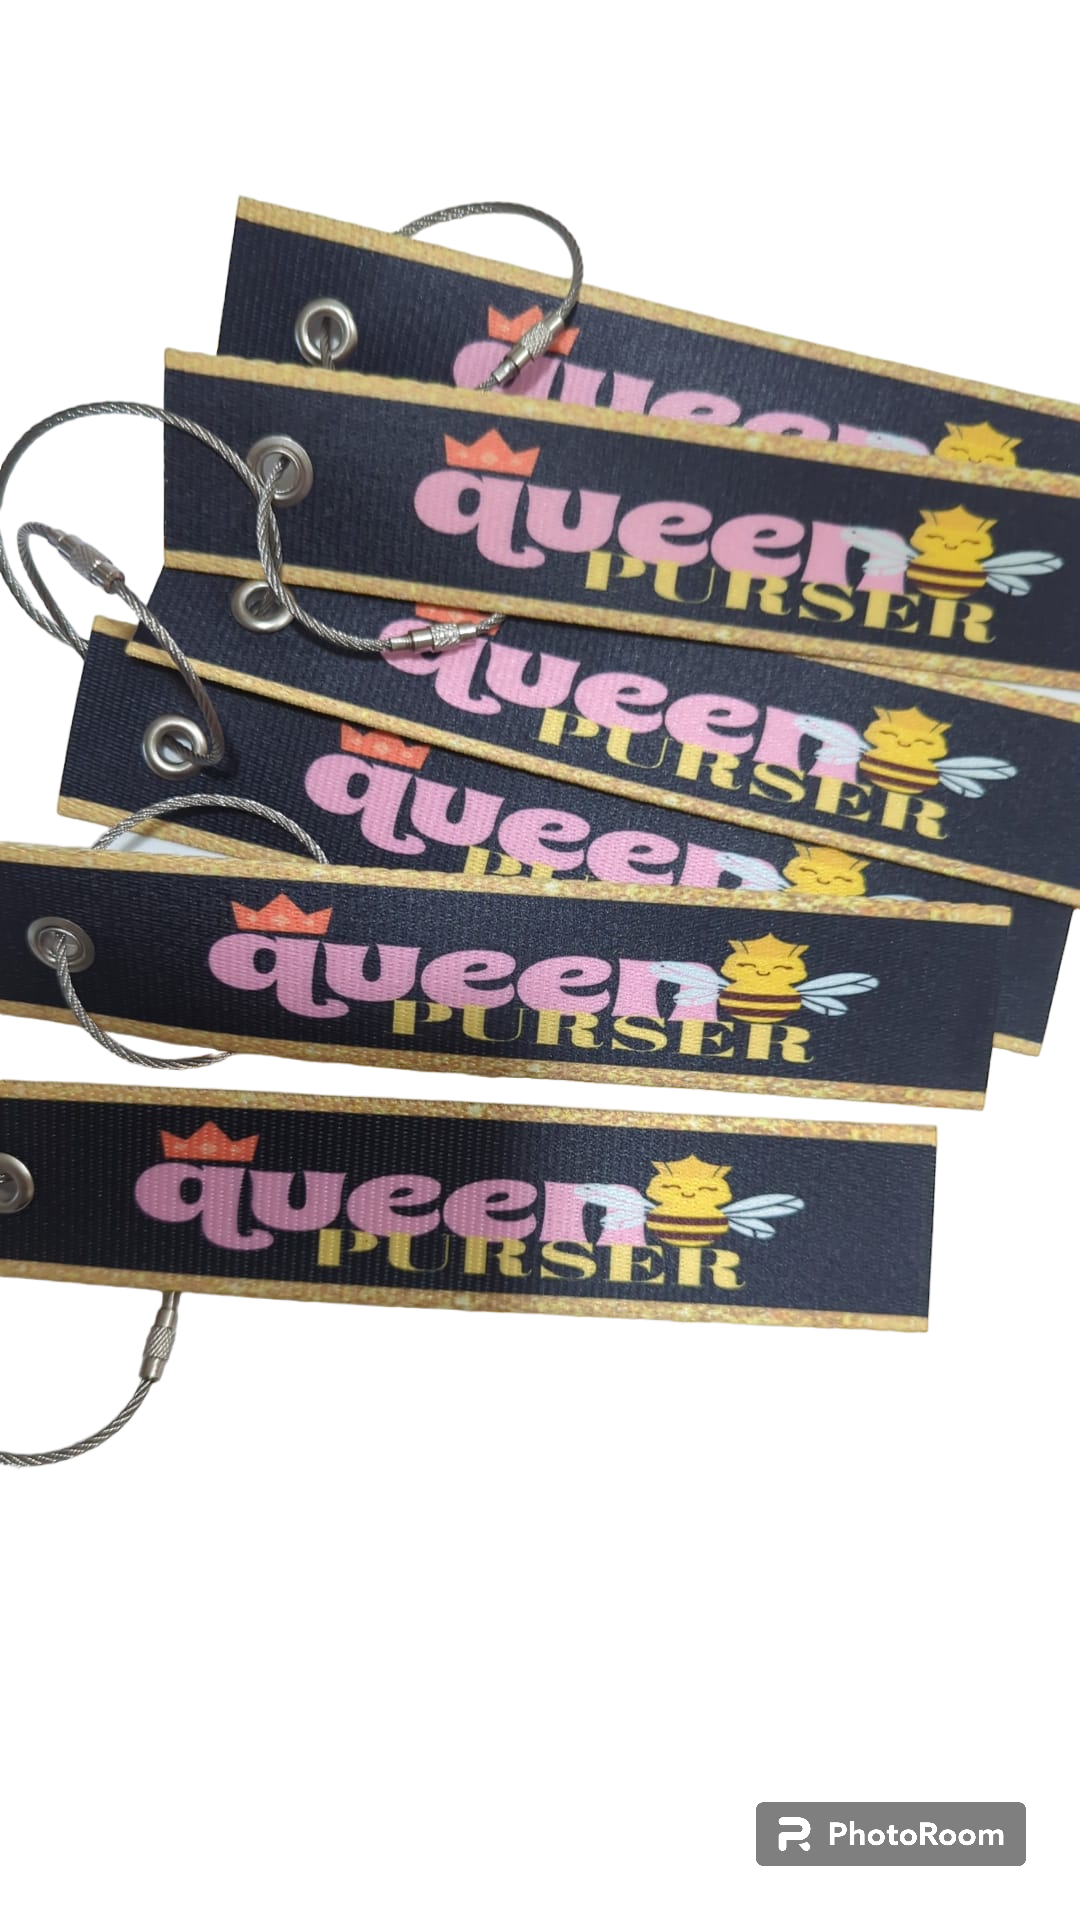 Queen B Purser(Long)  Luggage Tag. IT CAN BE CUSTOMIZED